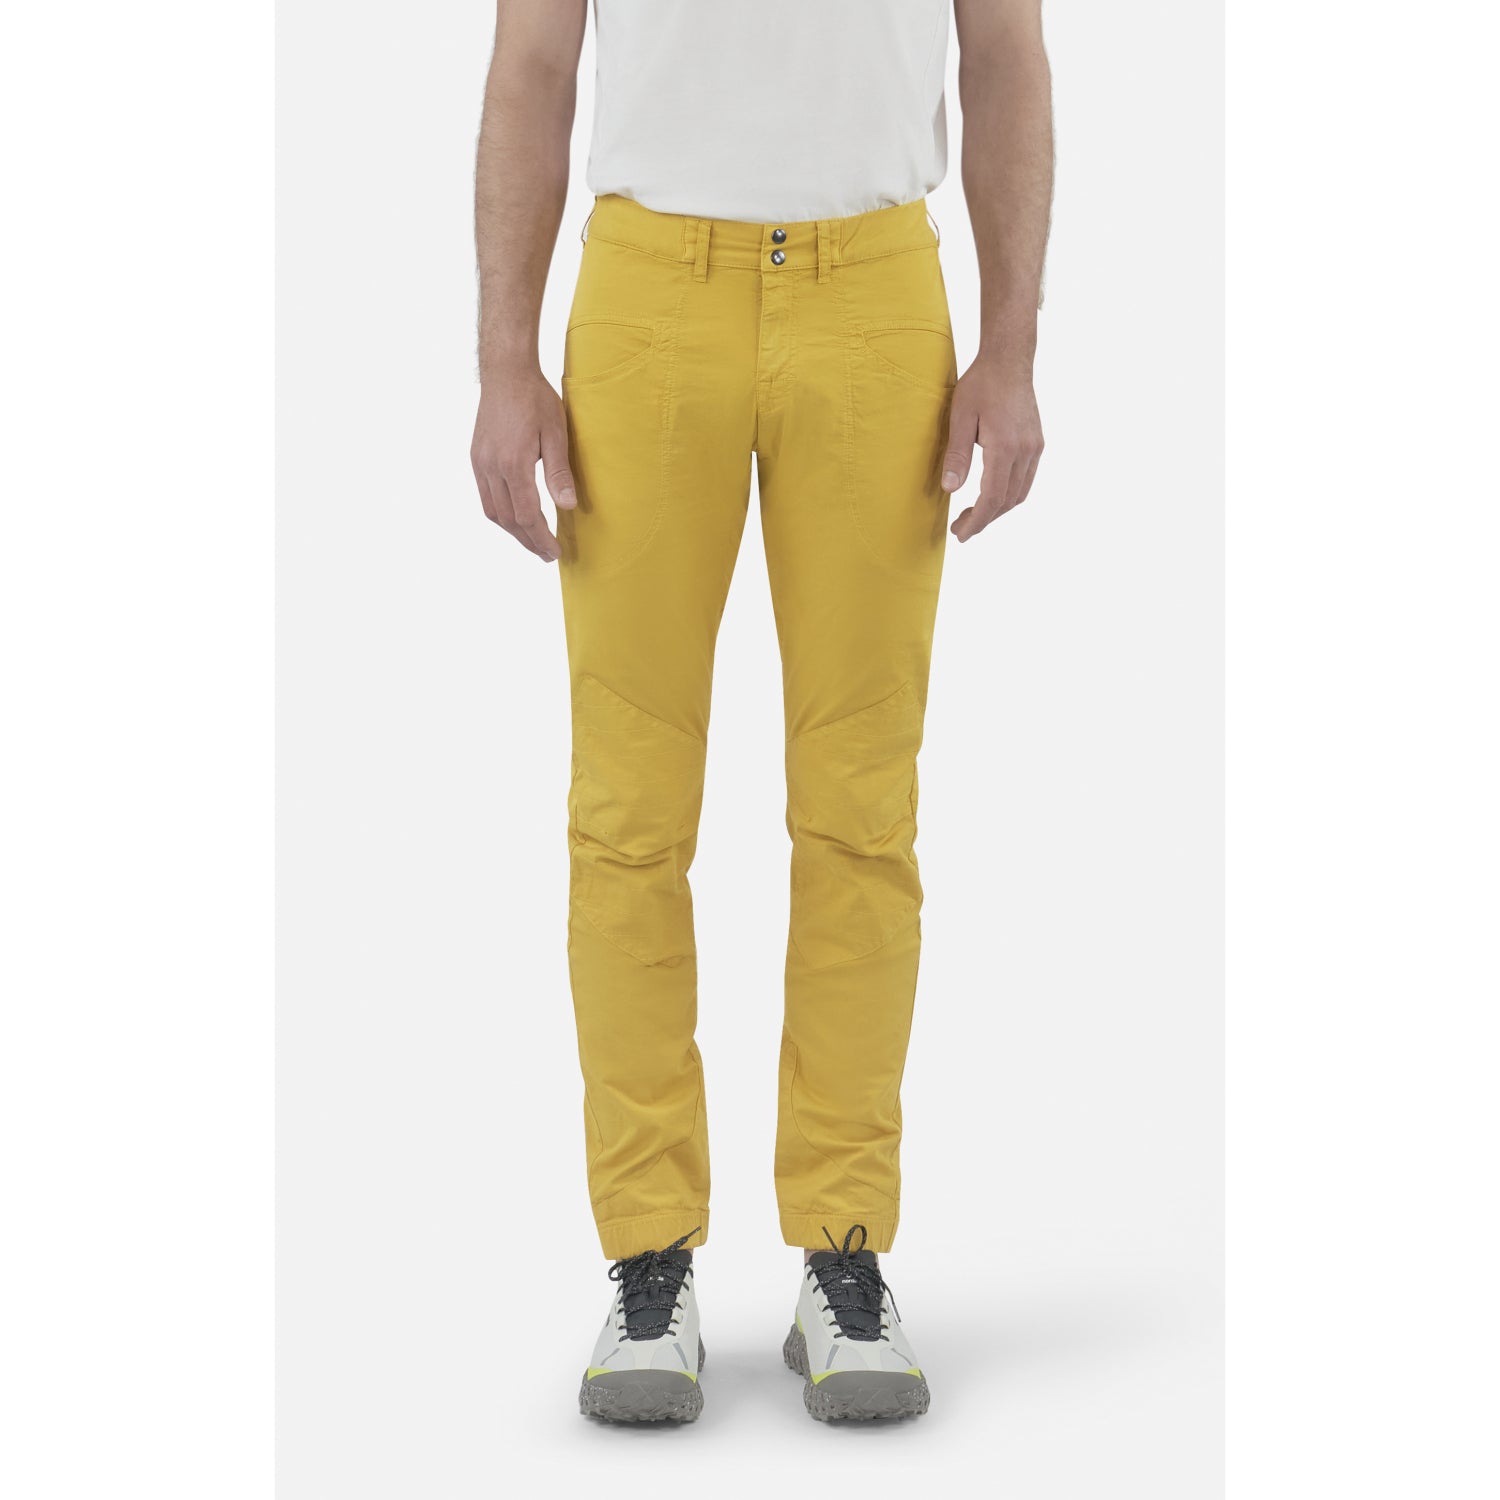 Looking For Wild Fitz Roy Pant - Mens (Spicy Mustard)